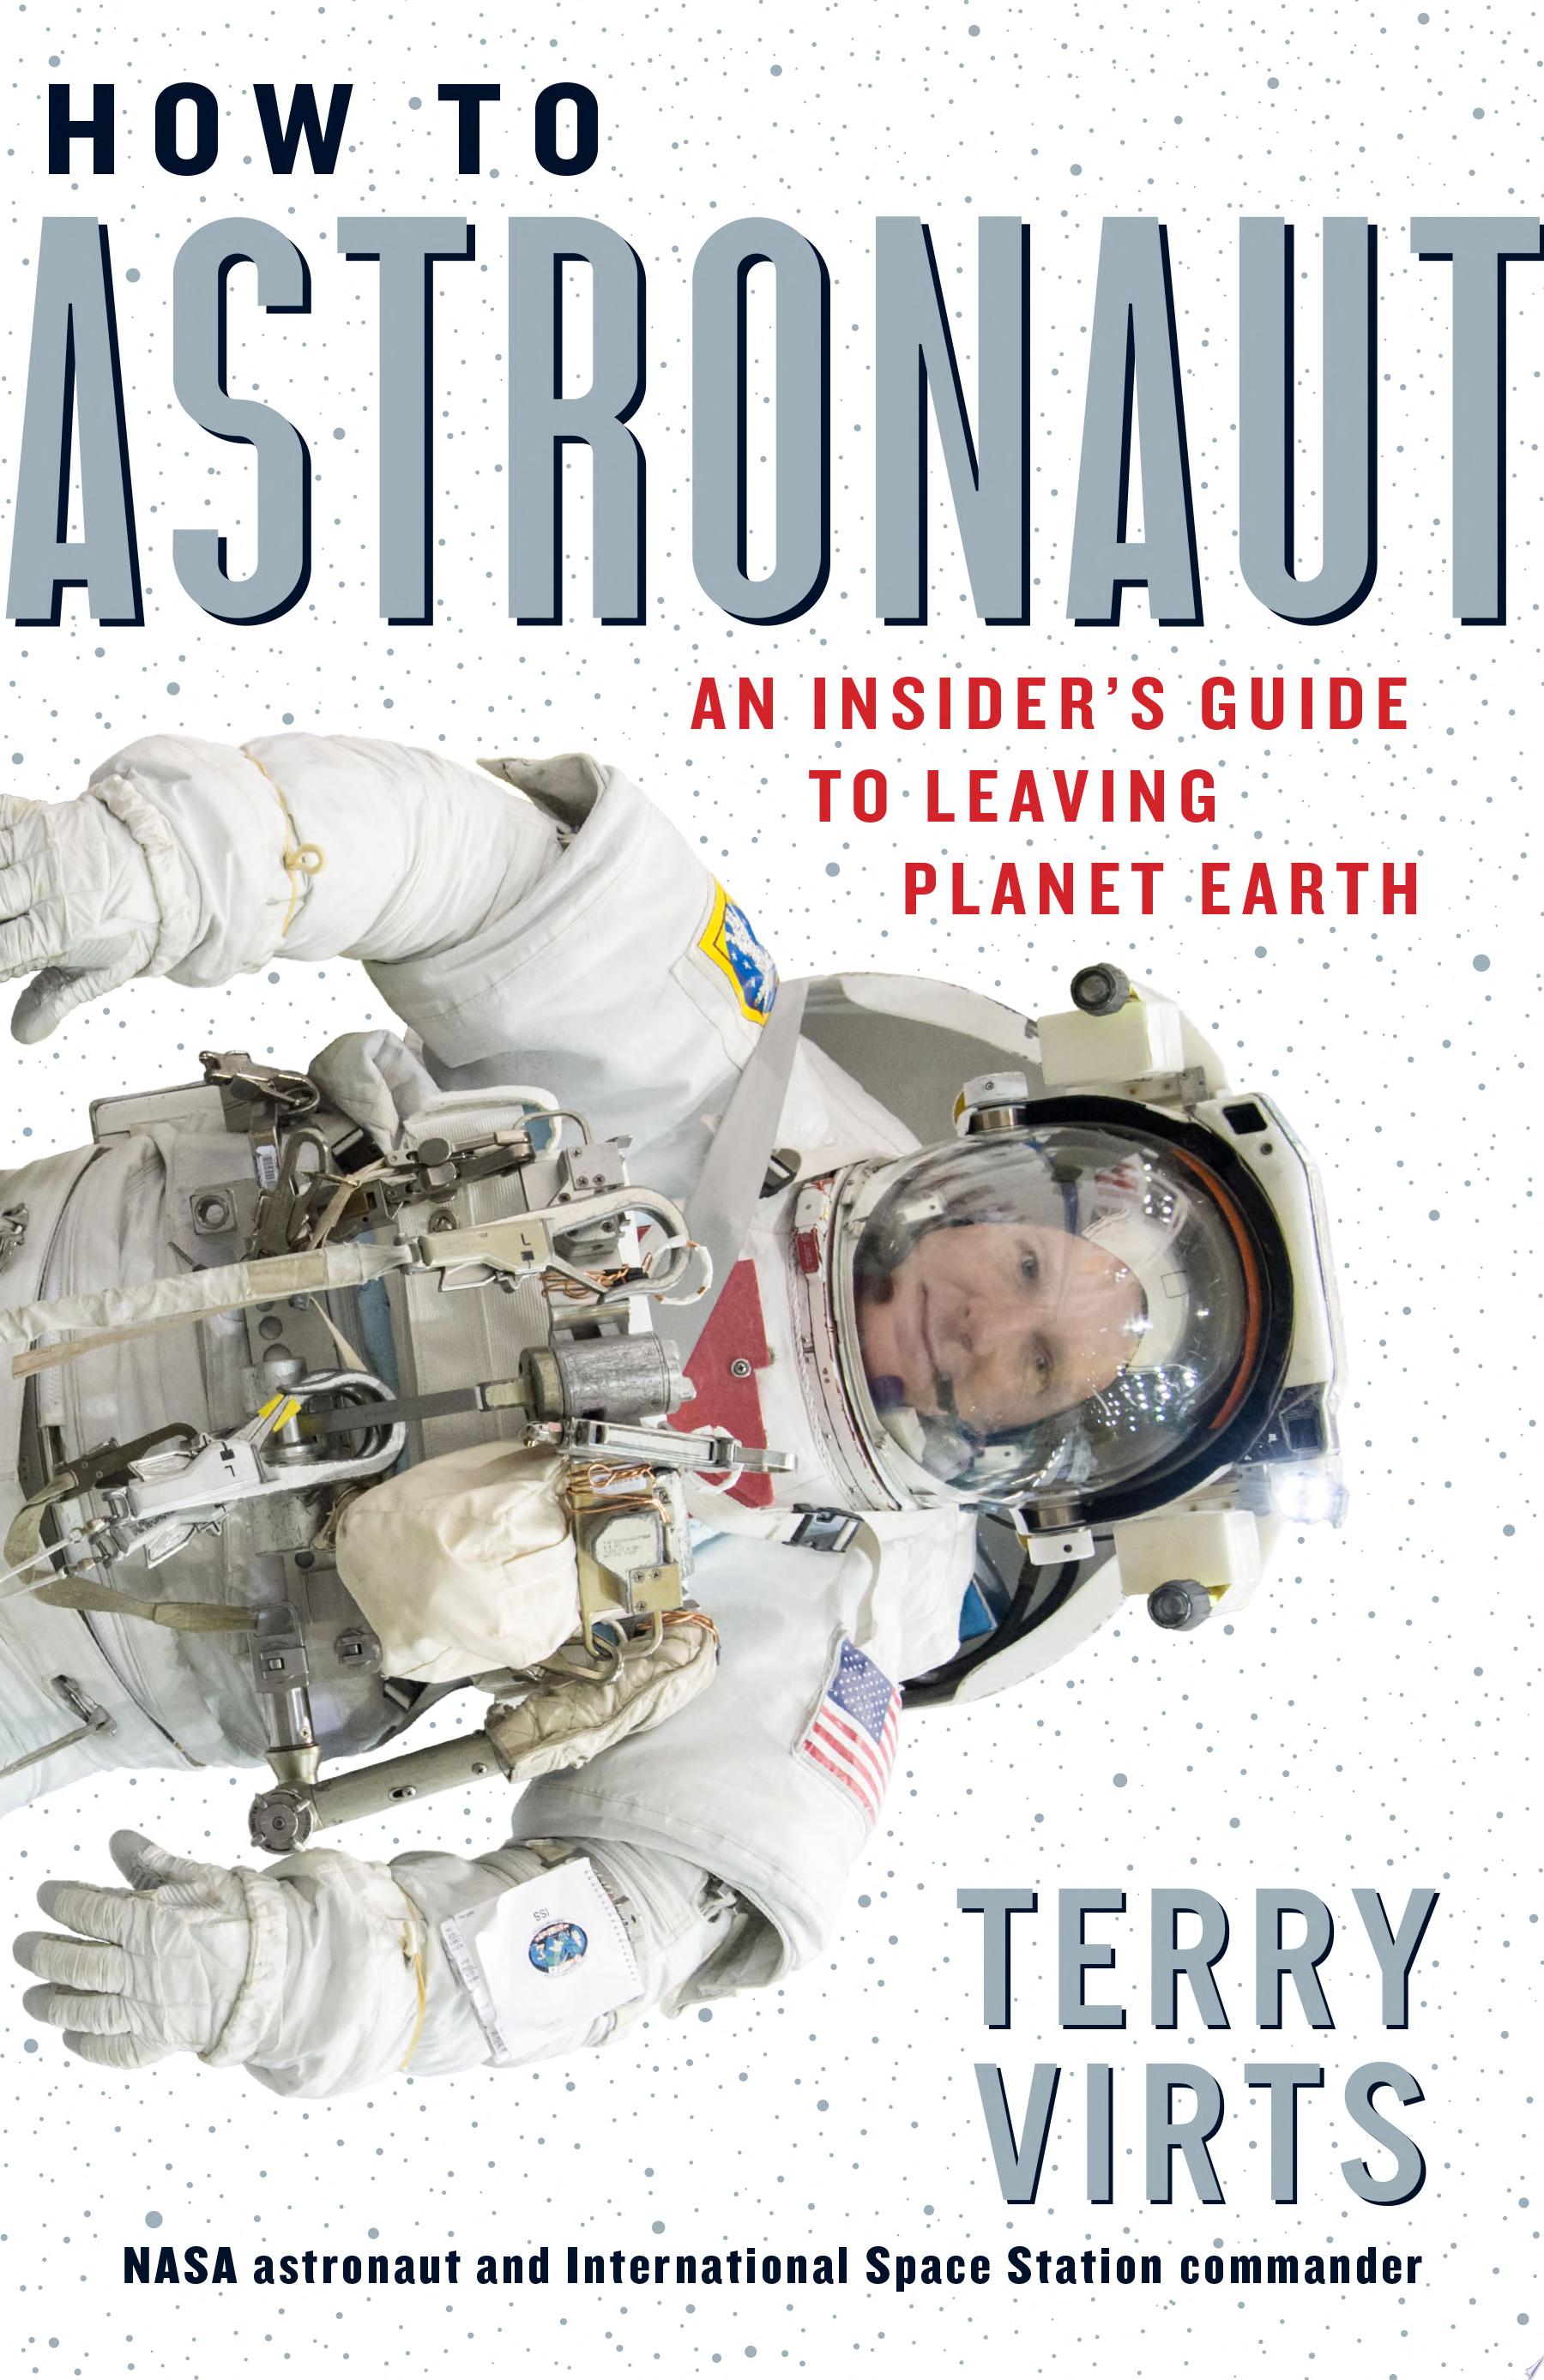 Image for "How to Astronaut"